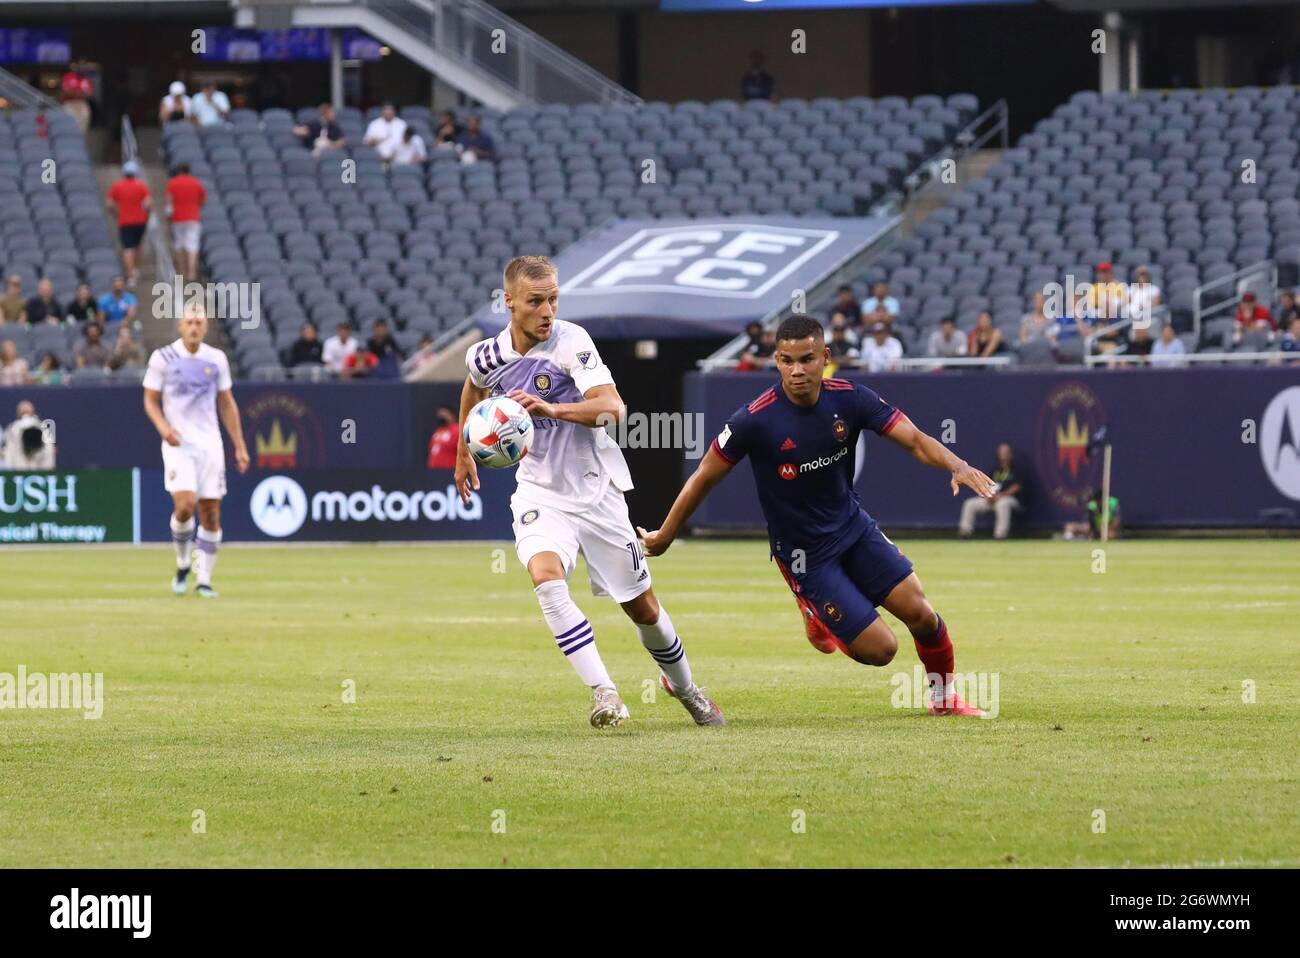 Chicago Fire defender Miguel Angel Navarro (6) and Orlando City forward Silvester van der Water (14) battle for the ball during a MLS match at Soldier Stock Photo